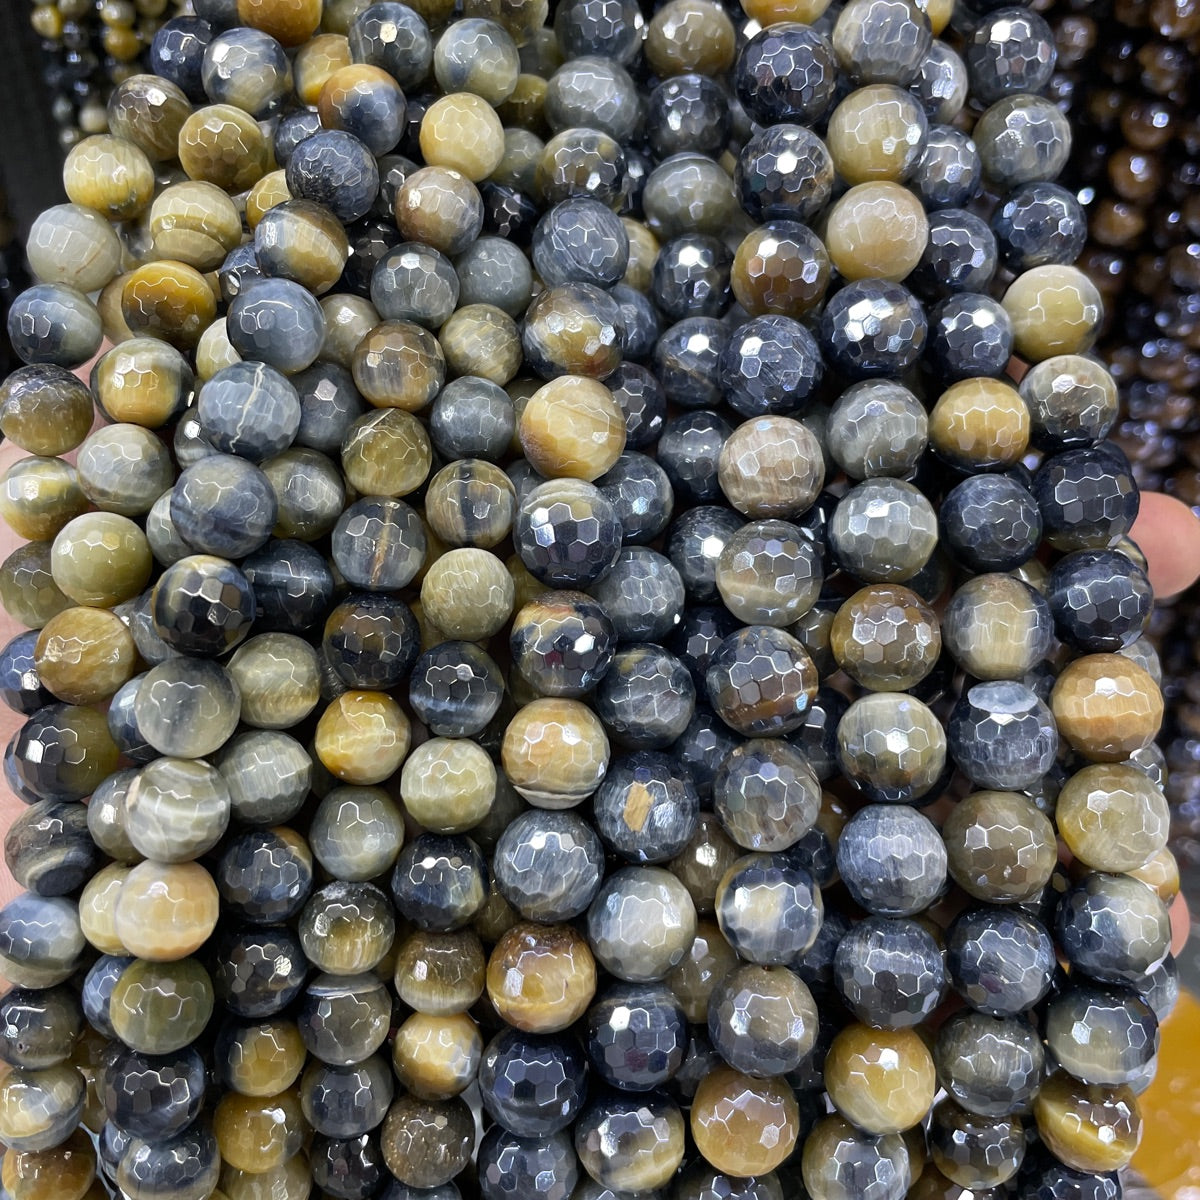 10mm Electroplated Golden Blue Tiger Eye Faceted Beads--Grade A Premium Quality Electroplated Beads New Beads Arrivals Premium Quality Agate Beads Charms Beads Beyond